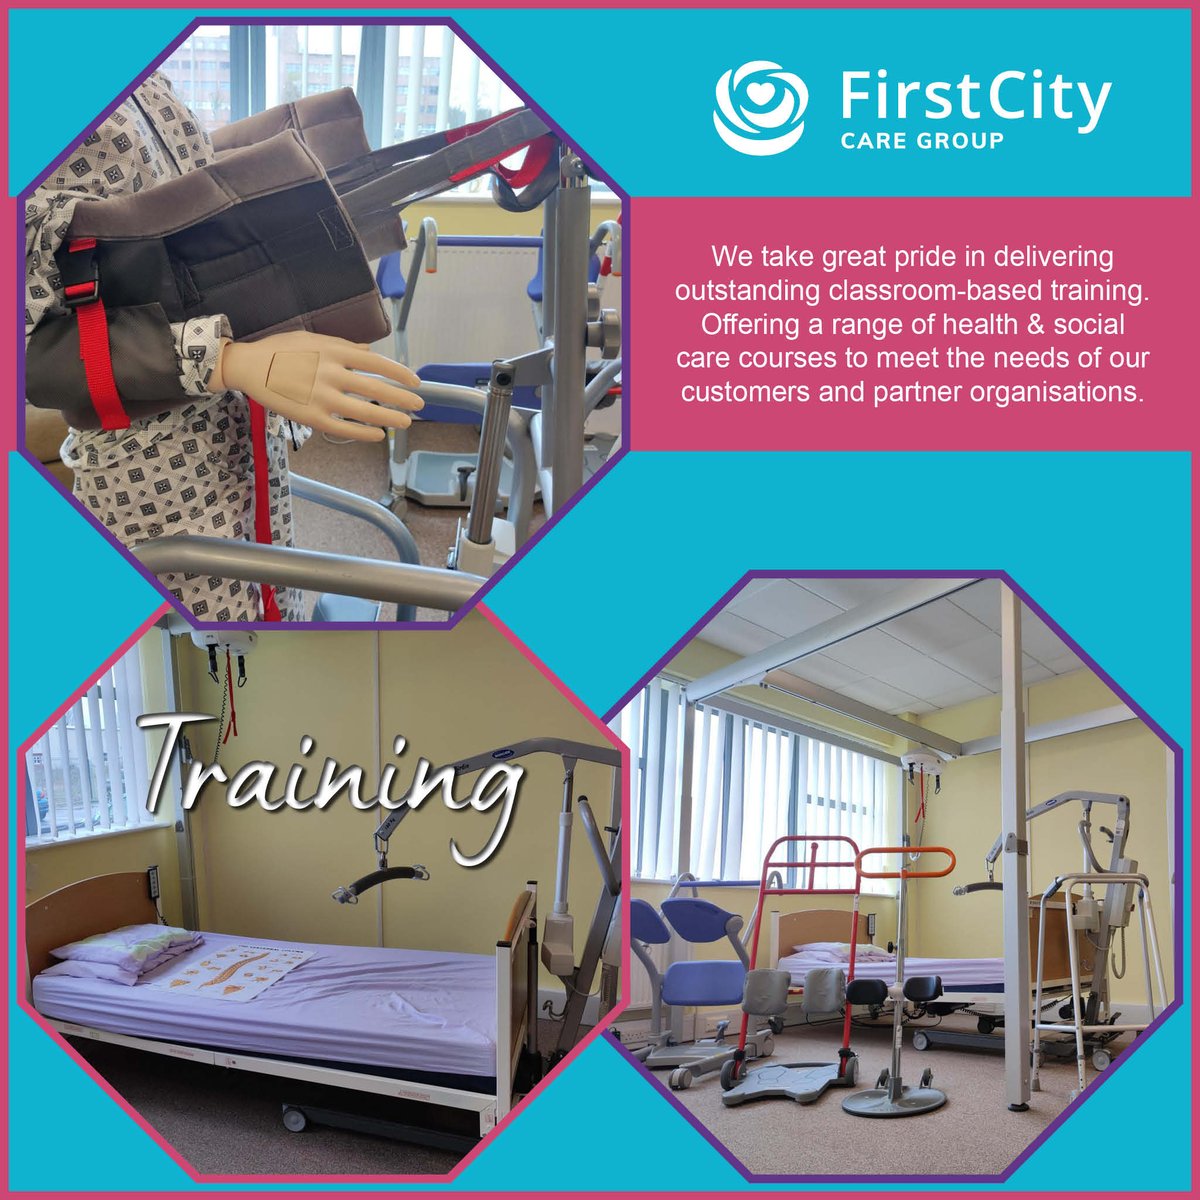 You can find out more about our #Training and upcoming sessions here firstcitynursing.co.uk/pages/training… #CareerinCare #Carework #Healthcaretraining #healthandsocialcaretraining #FirstCityJourney #FirstCityTraining #Thursday #CareTraining